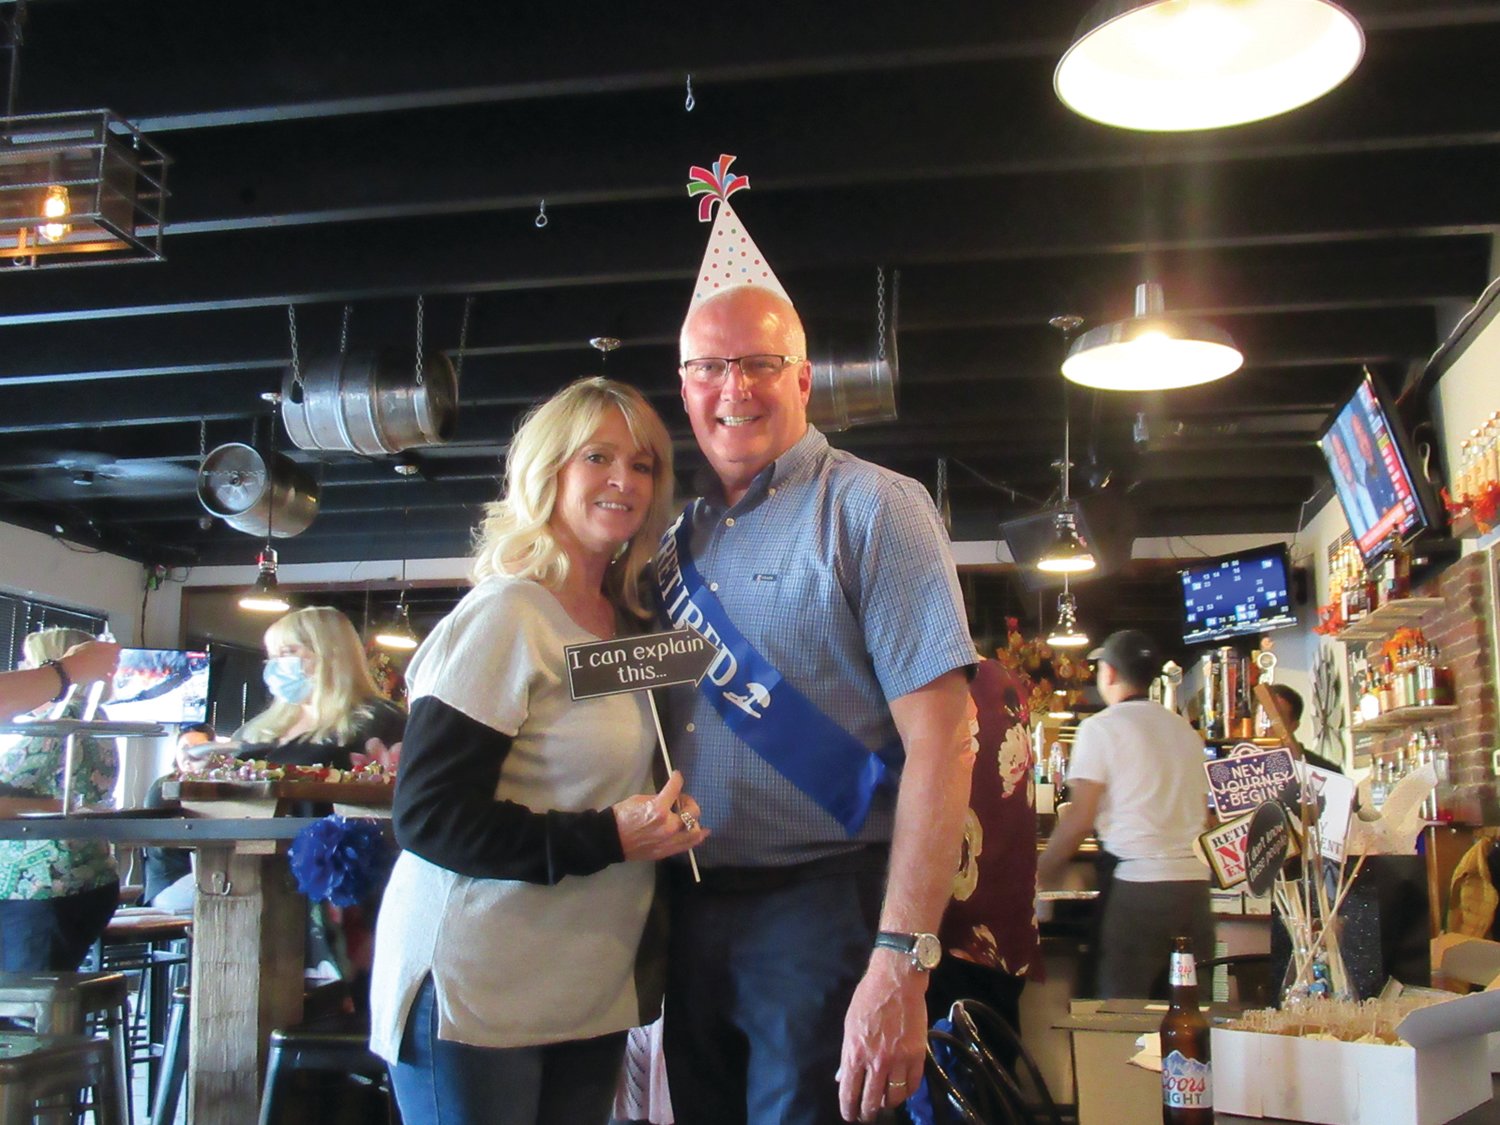 TOP TANDEM: Jerri Cantone, who will succeed Dave Cournoyer upon his retirement last Friday from the Johnston School Department, enjoys a lighter moment with her boss during last Thursday’s retirement party.